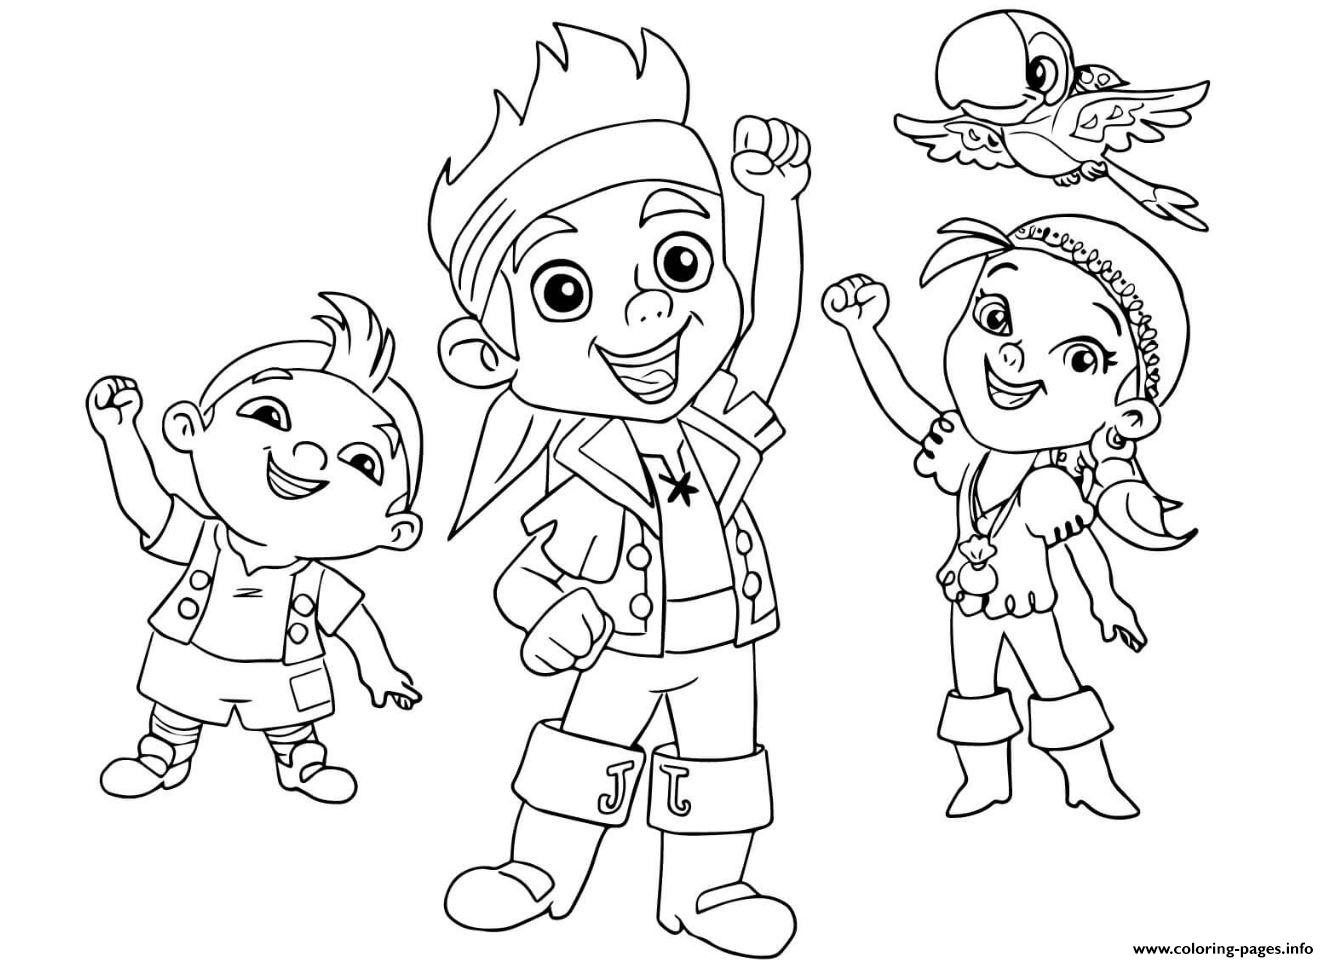 Jake And The Neverland Pirates Coloring Pages
 Jake And The Neverland Pirates Team Halloween Coloring